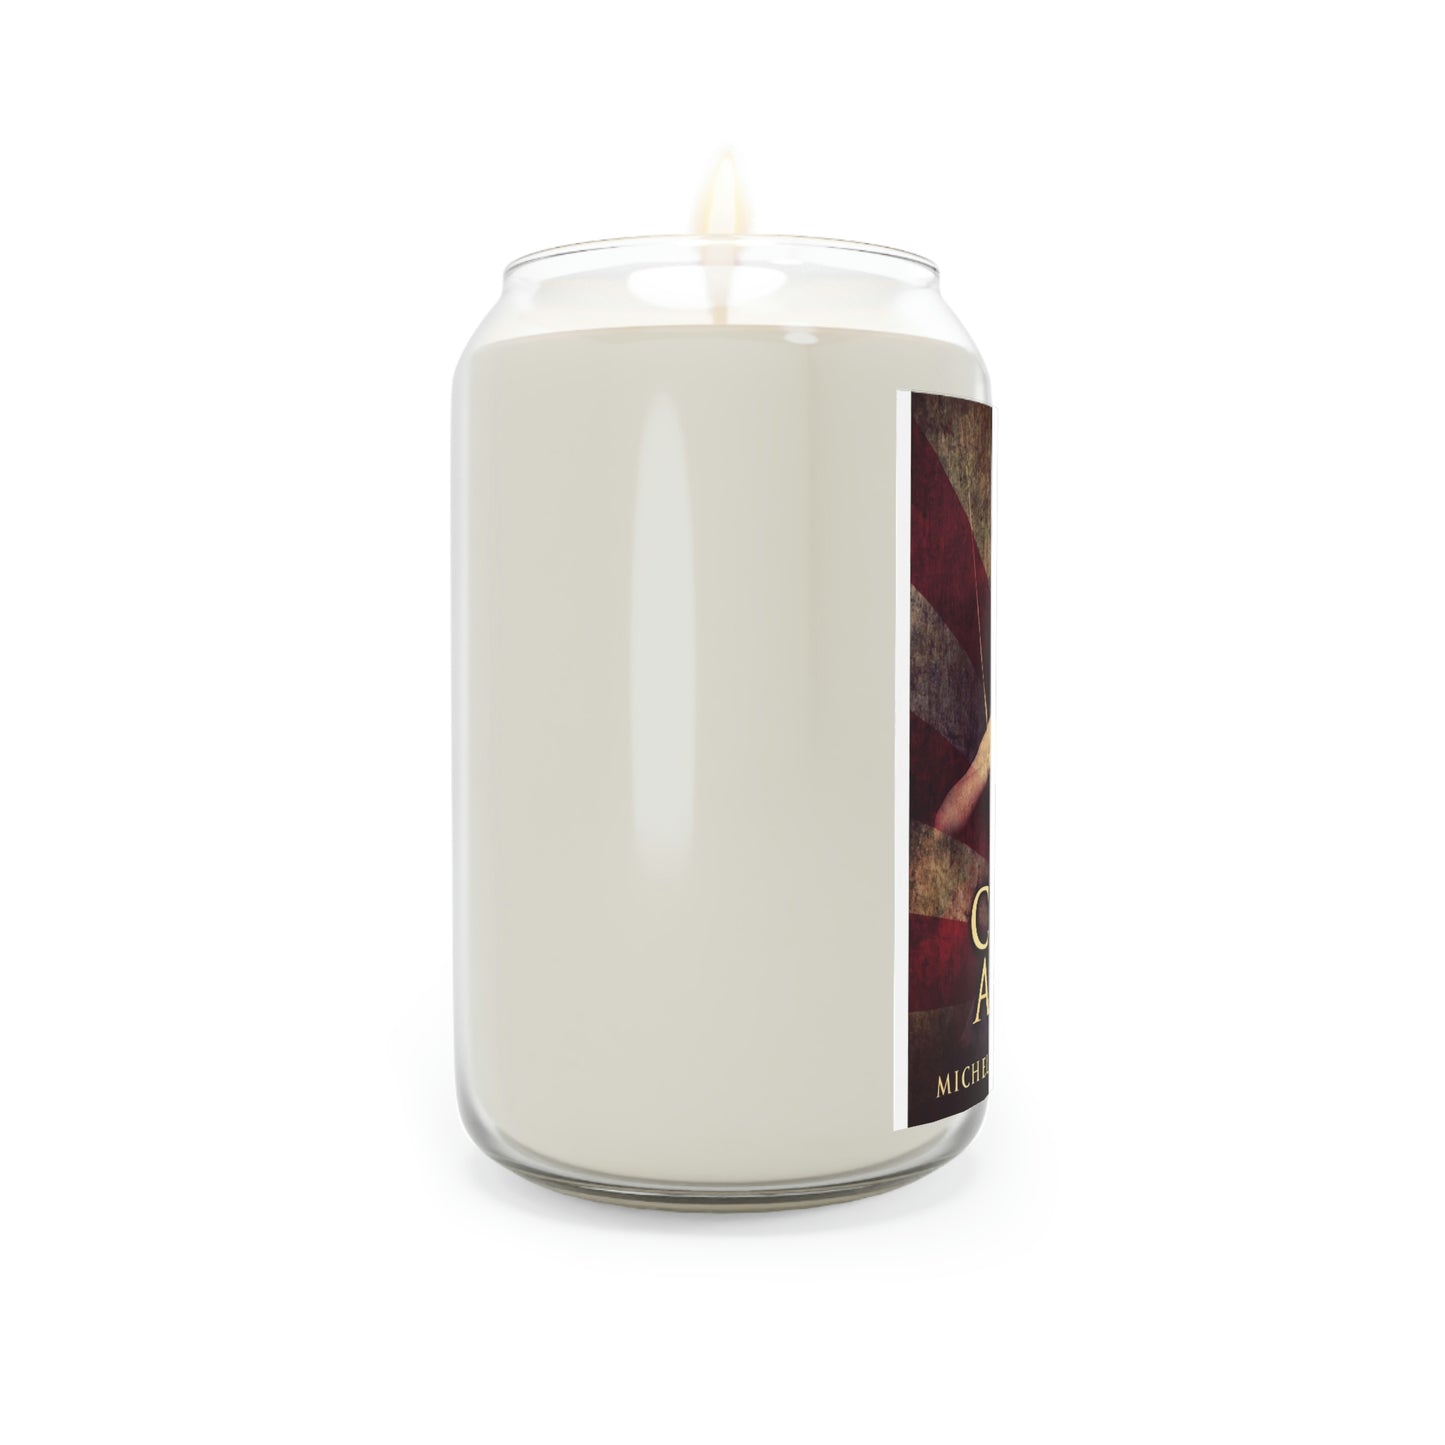 The Circus Affair - Scented Candle